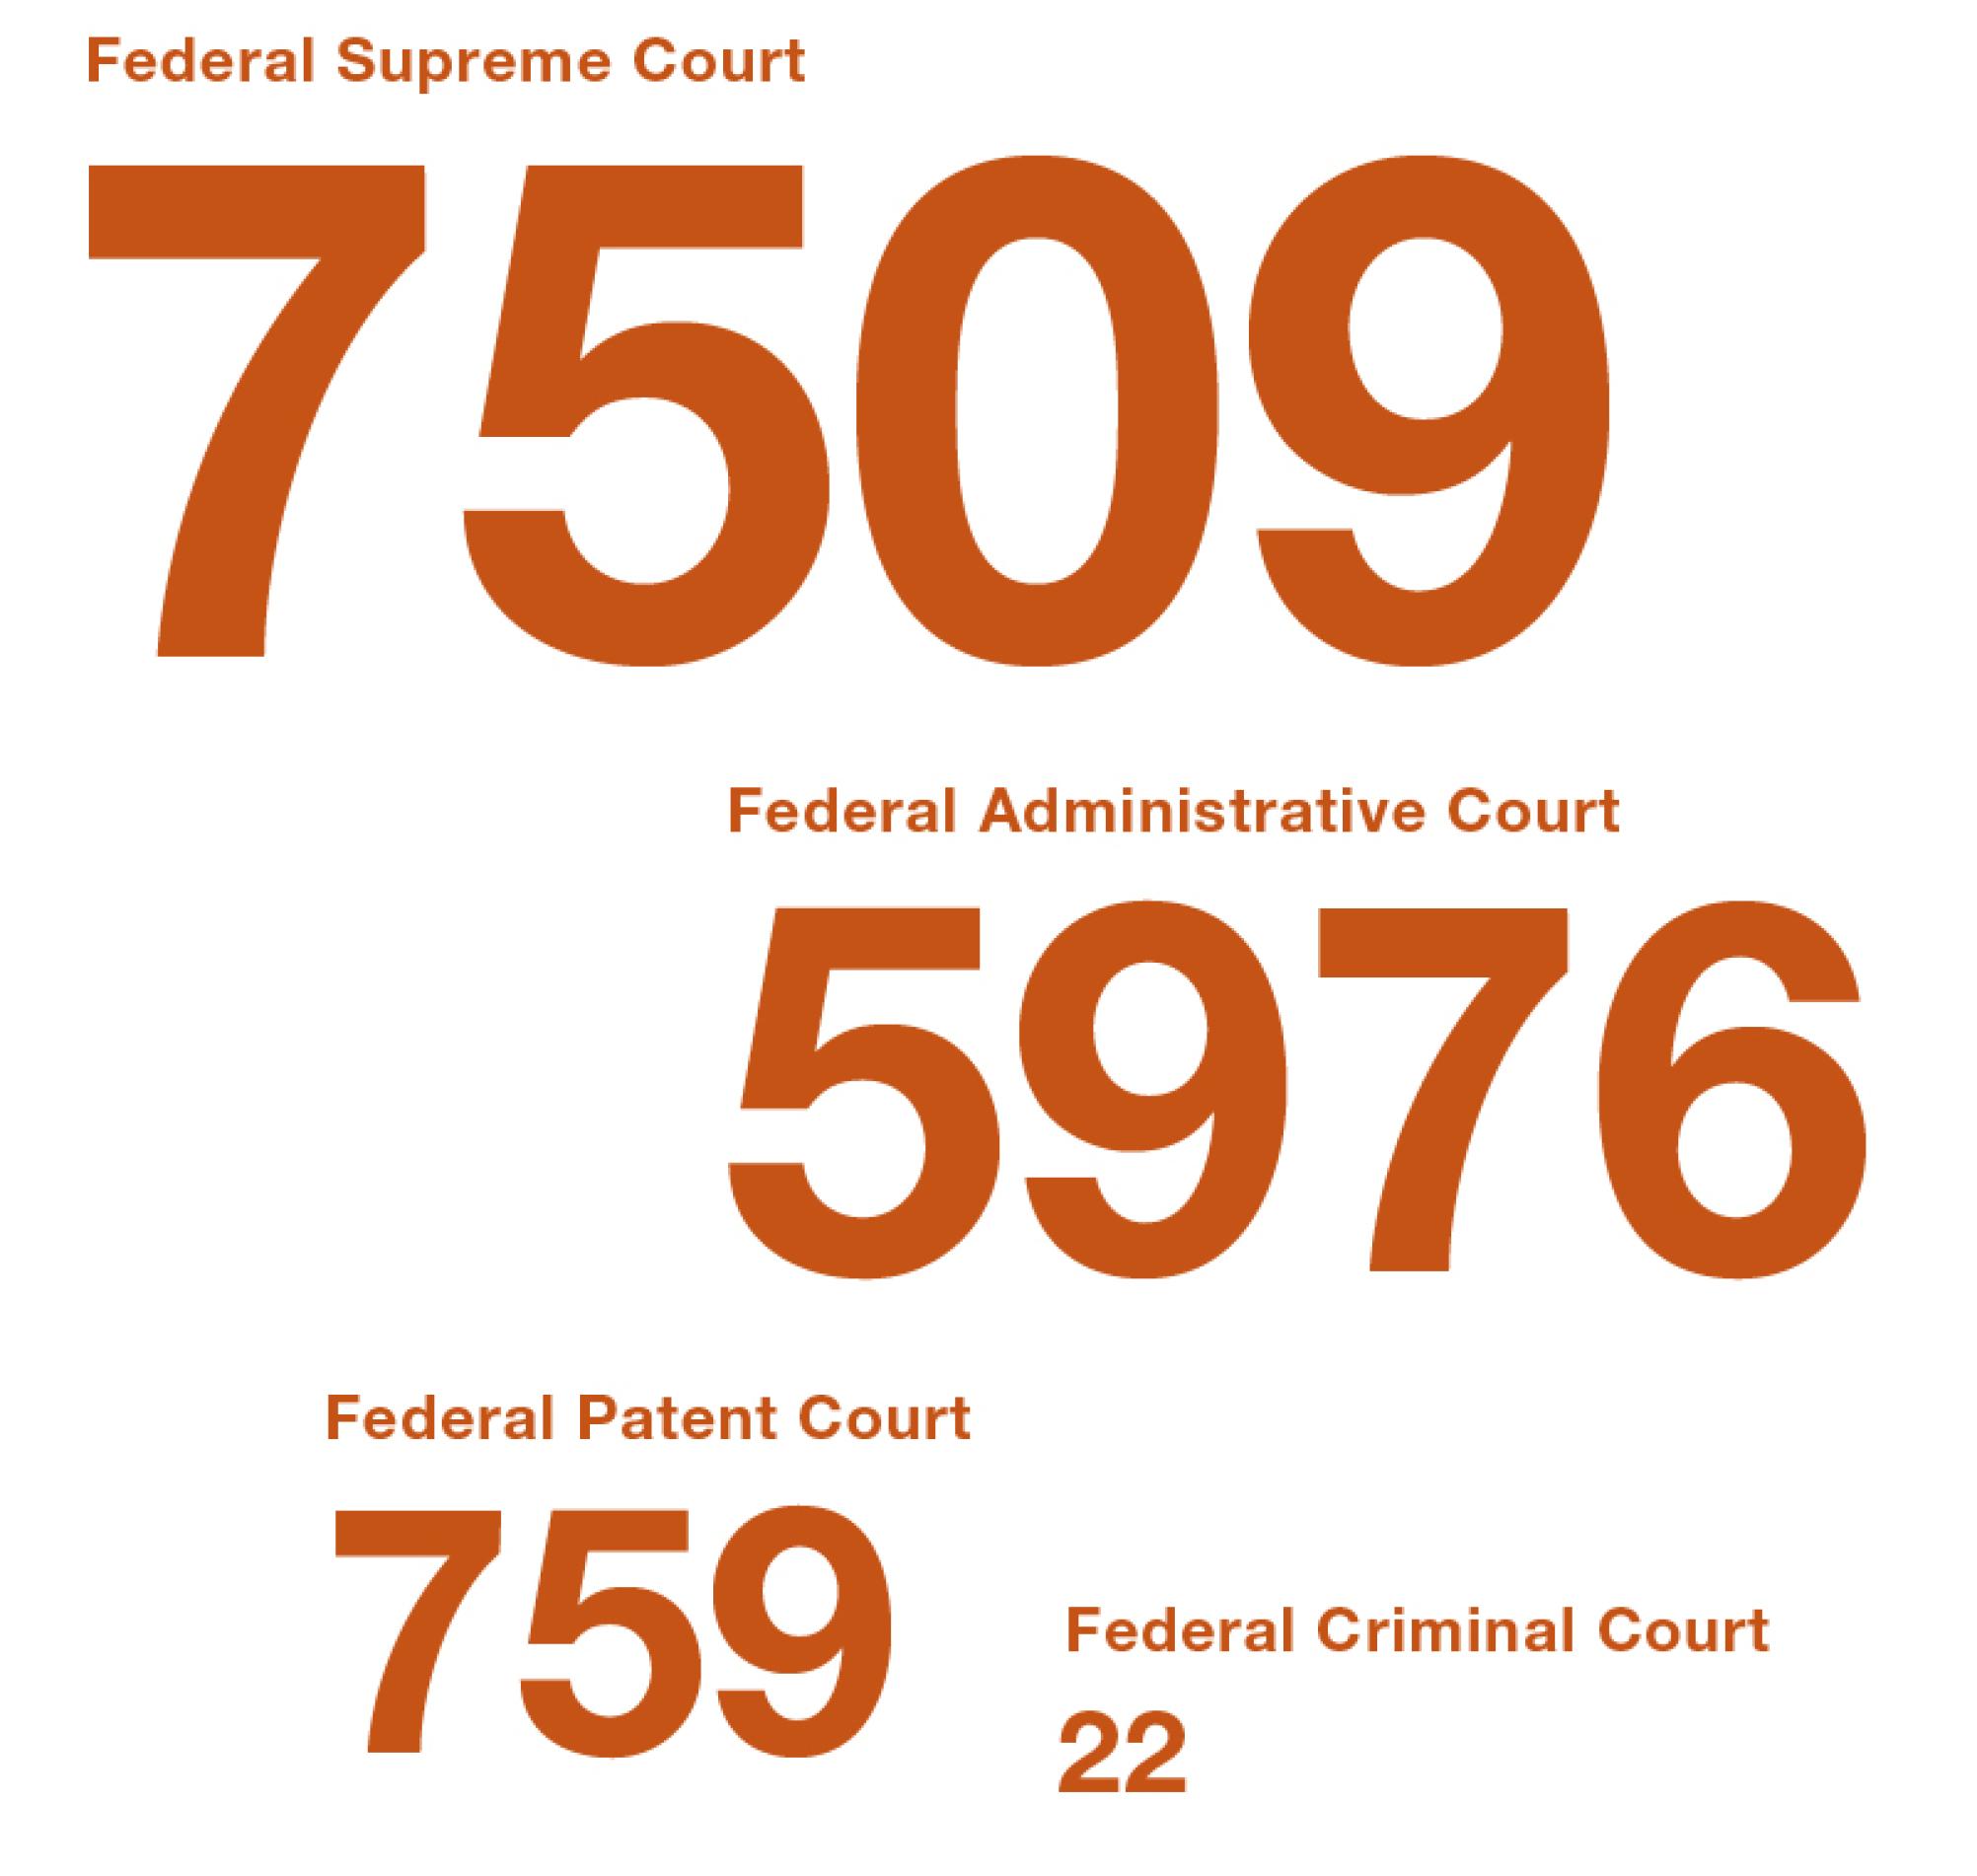 This image highlights the number of cases dealt with by the federal courts in 2019: The Federal Supreme Court dealt with around 7500 cases. The Federal Administrative Court, around 6000 cases. The Federal Criminal Court, around 800 cases. The Federal Patent Court, around 20.